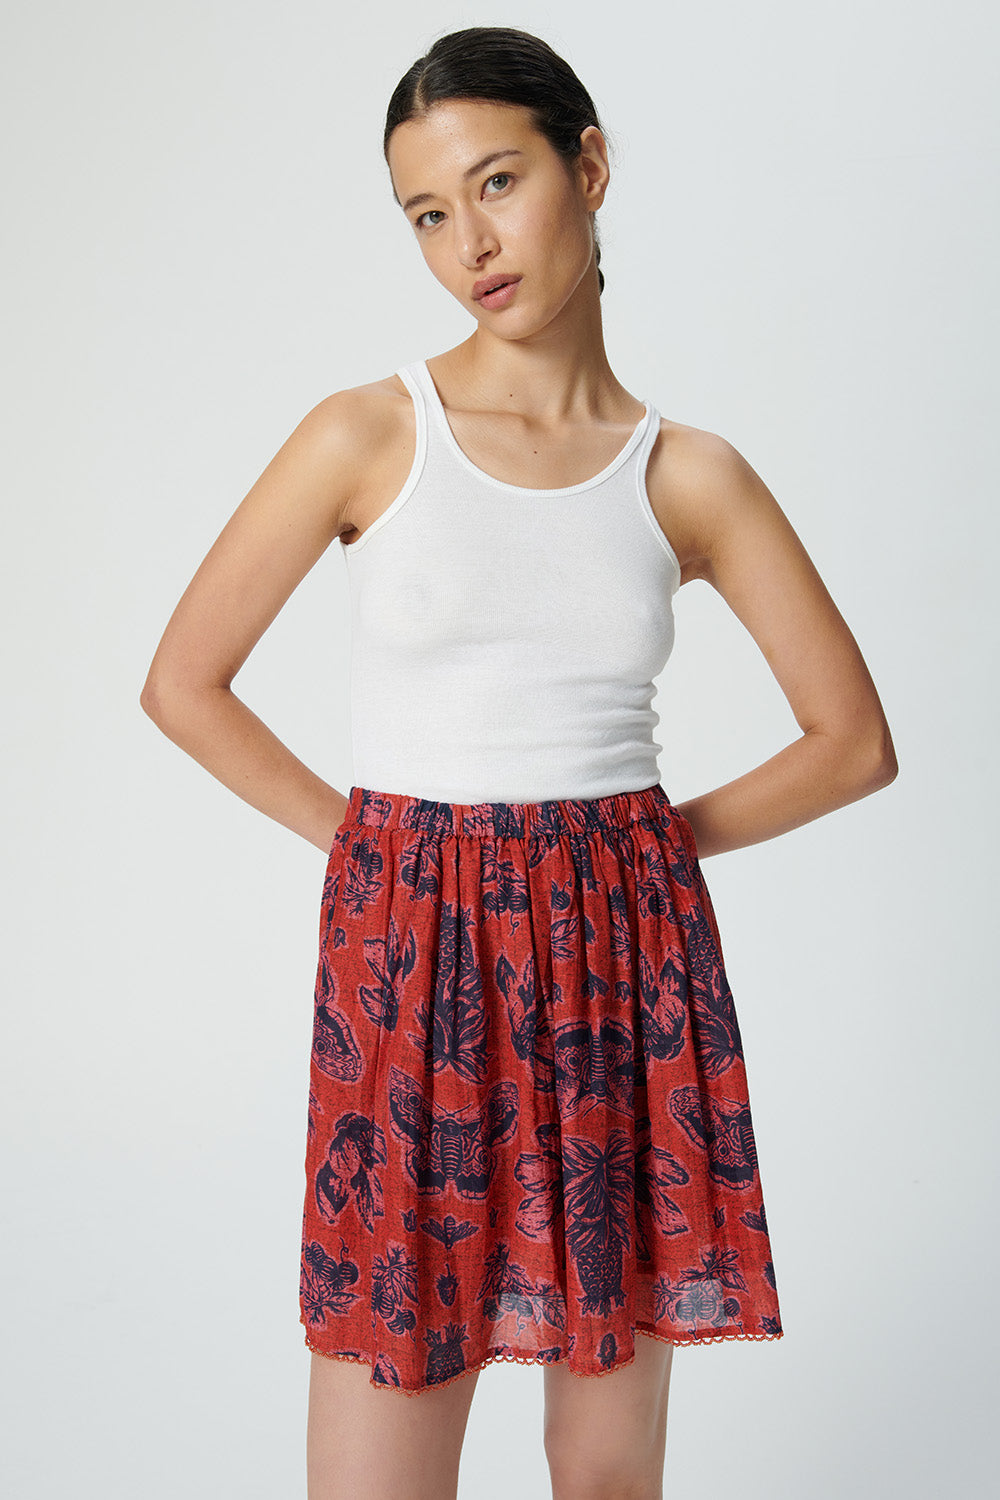 Willow Skirt - Crafty Flower Red